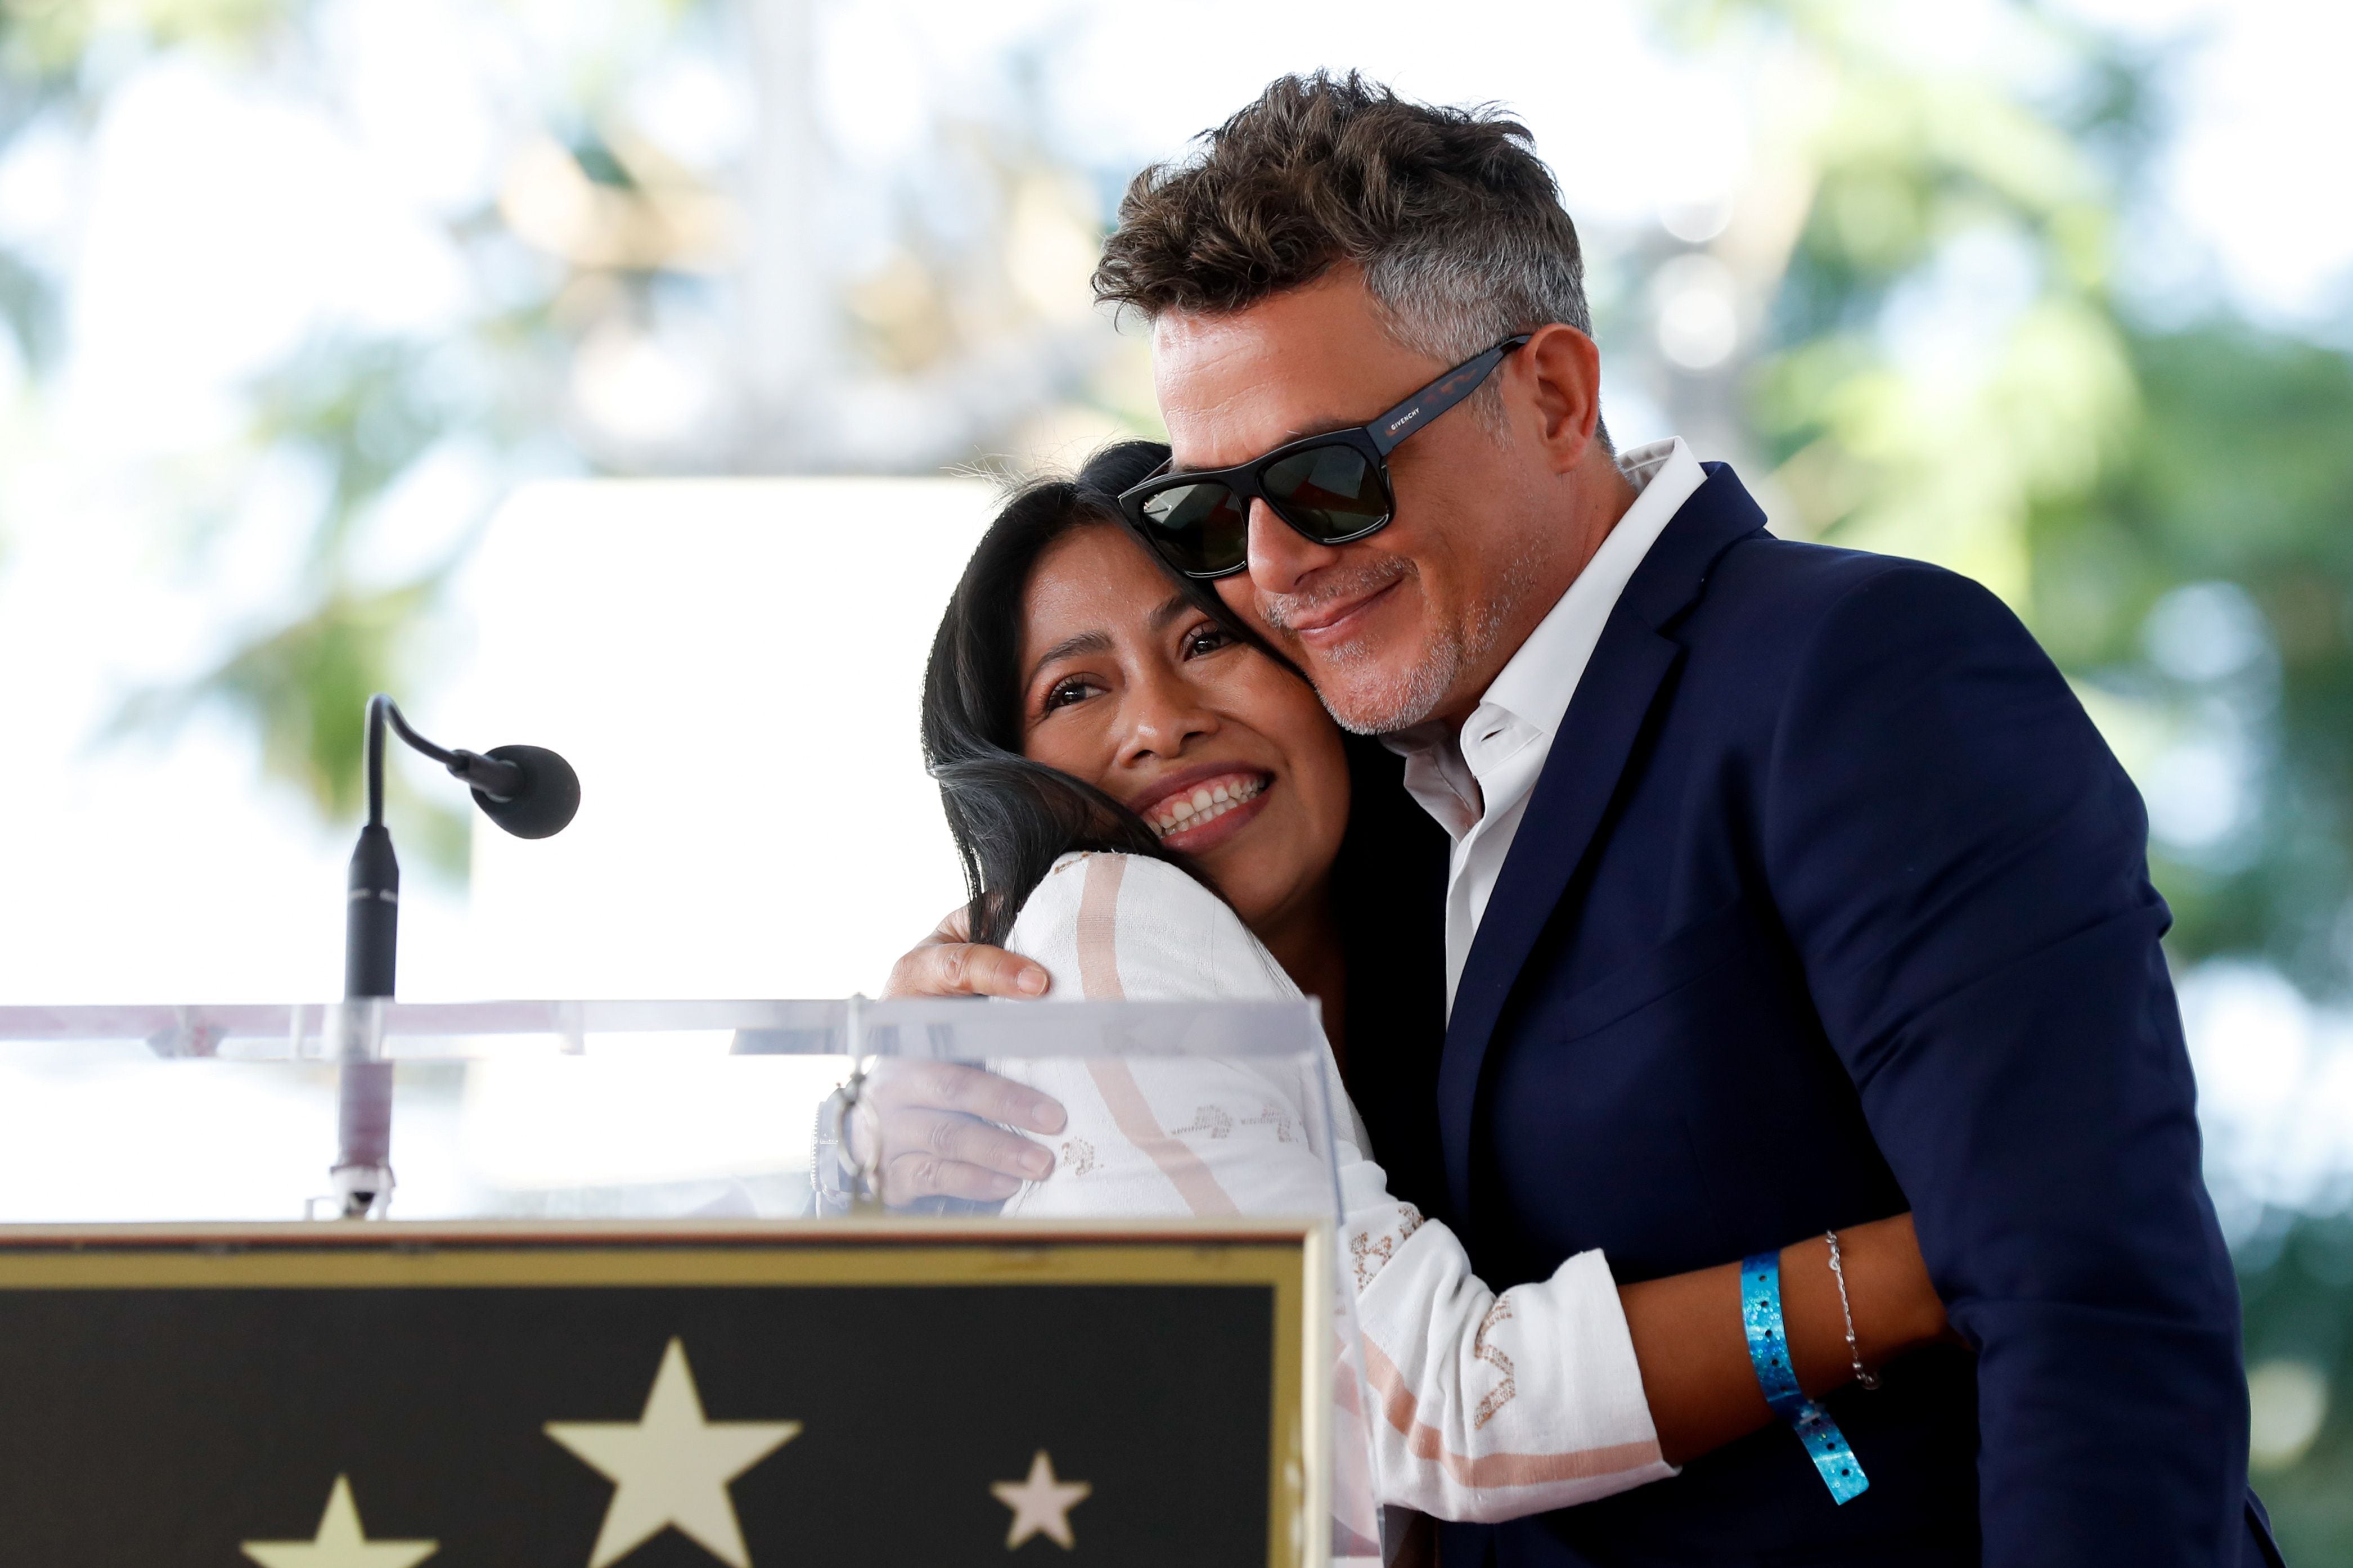 The actress was invited by Alejandro Sanz at the unveiling of his star in Hollywood (Photo: Reuters / Mario Anzuoni)